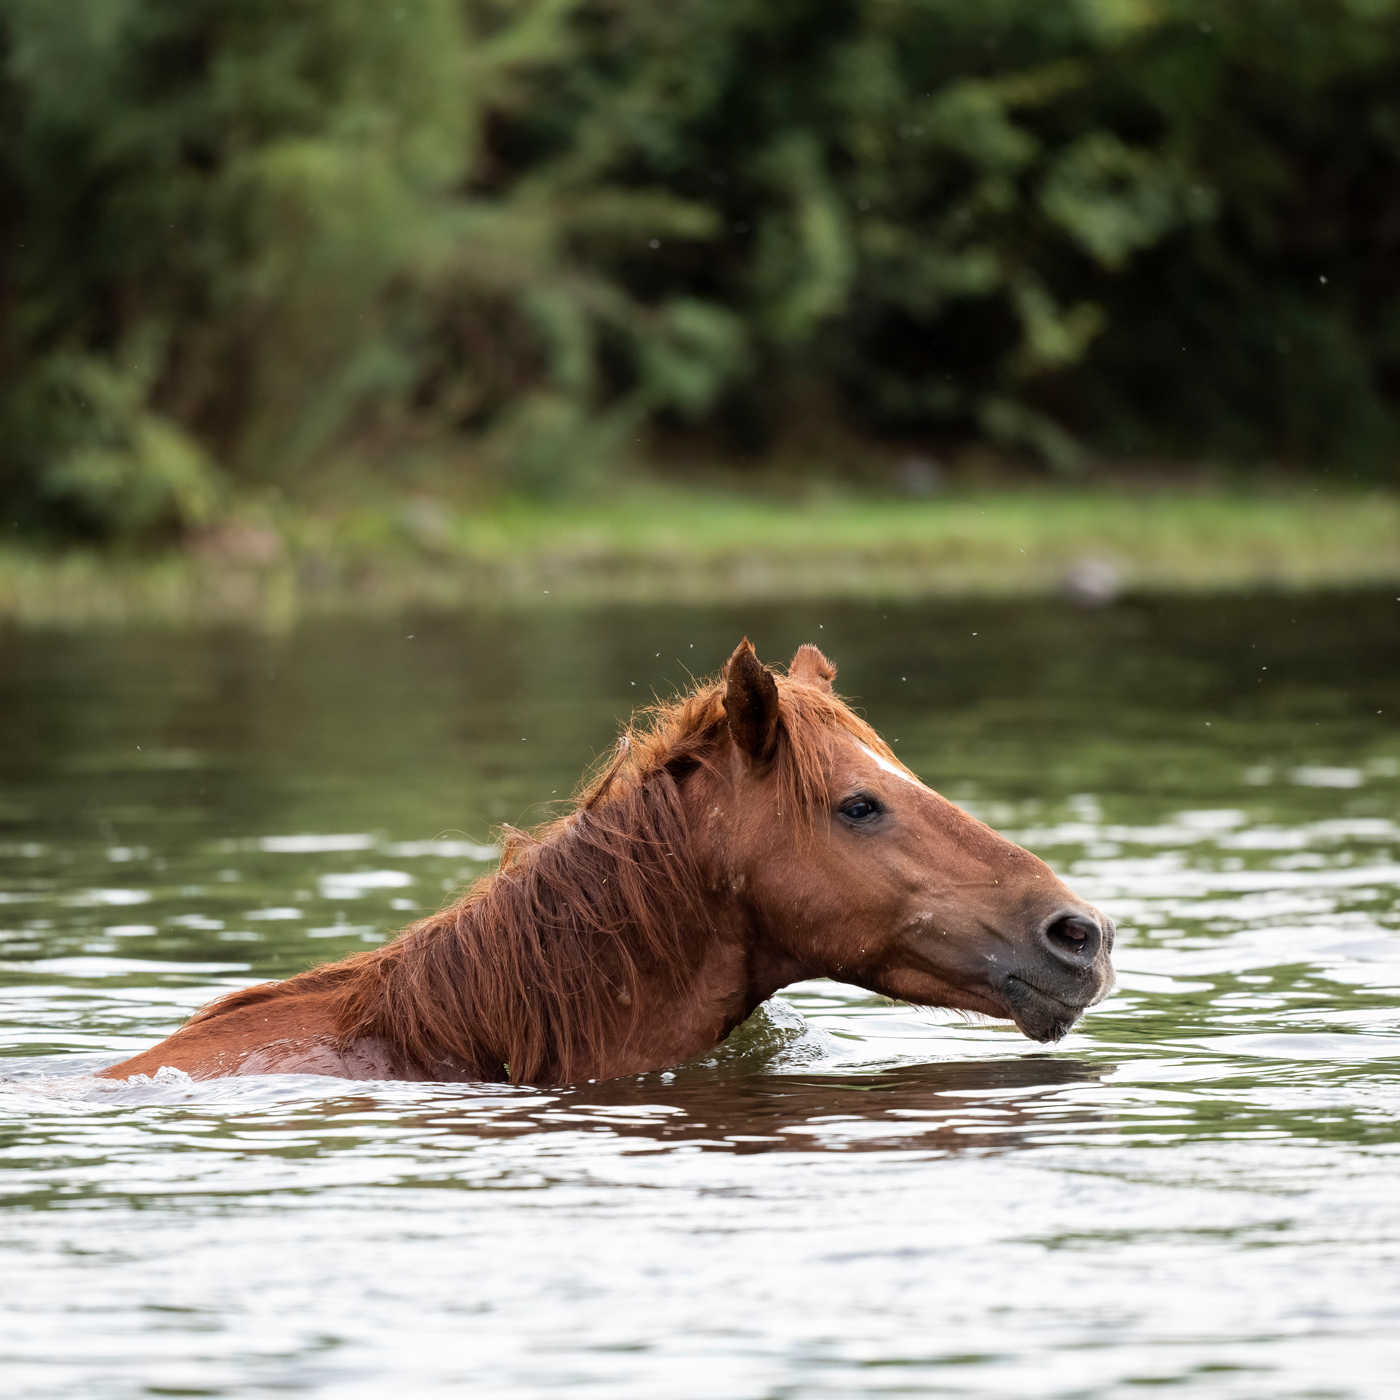 Wild Horse crossing the Salt River by swimming in Arizona